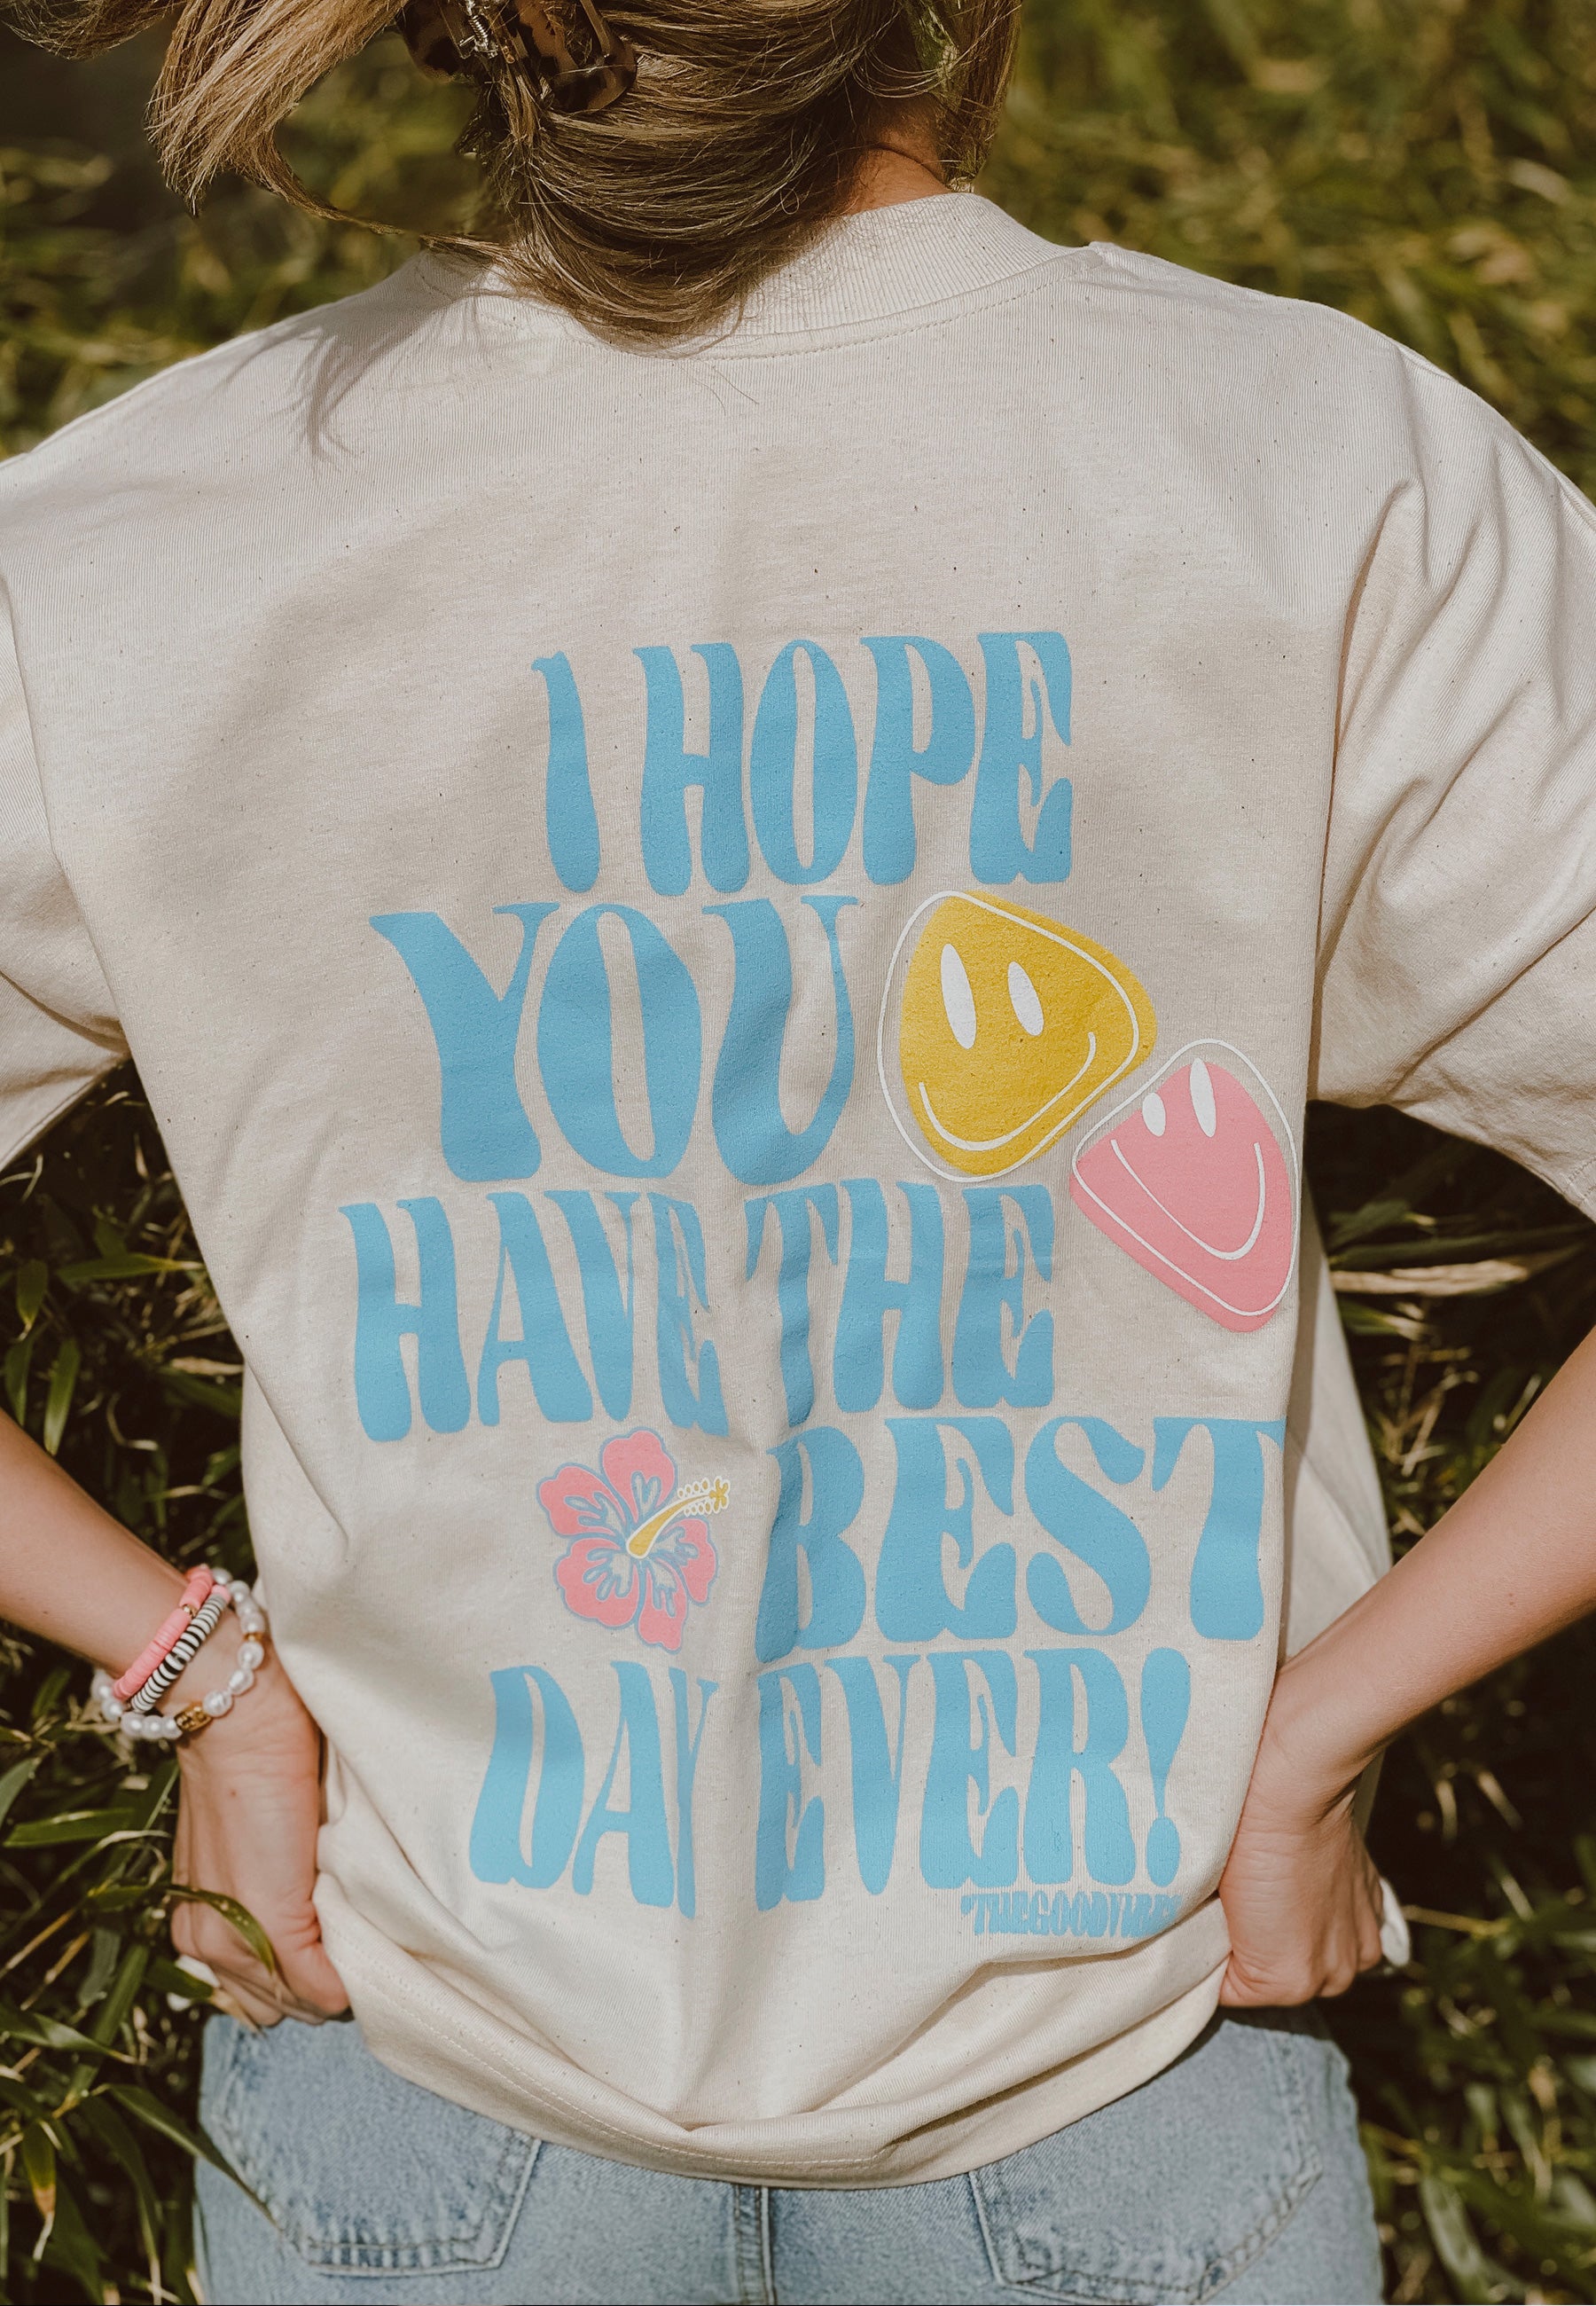 BEST DAY EVER Shirt Natural Raw